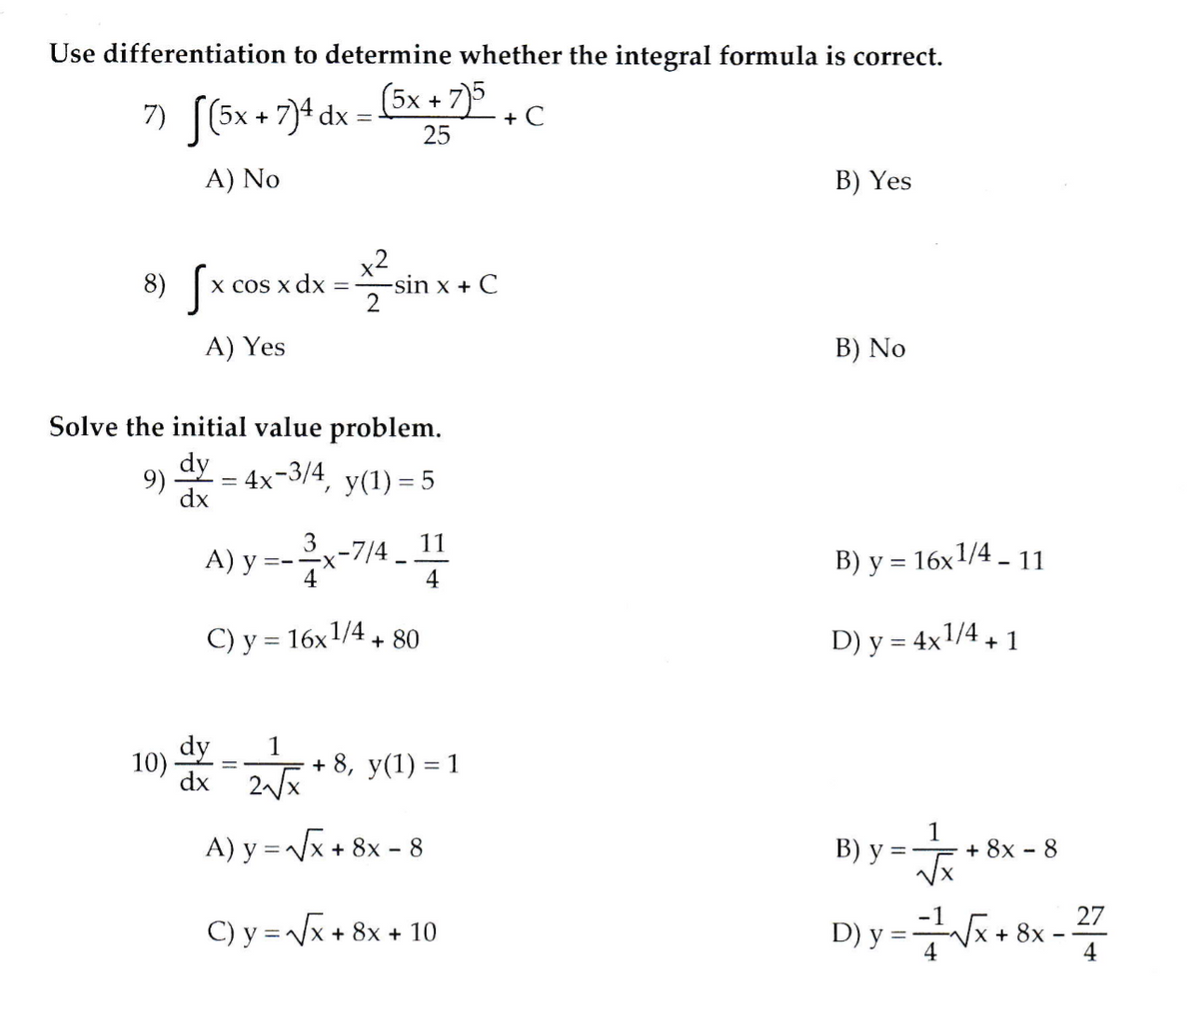 Use differentiation to determine whether the integral formula is correct.
7» [(6x + 7}+ dx = 5x + 7)5
+ C
25
A) No
B) Yes
8) S
x2
-sin x + C
x cos x dx
A) Yes
B) No
Solve the initial value problem.
9)
dy
4x-3/4
У(1) 3 5
dx
A) y =--7/4 -
11
B) y = 16x1/4 – 11
4
C) y = 16x1/4+ 80
D) y = 4x1/4, 1
%3D
dy
10) -
1
+ 8, y(1) = 1
dx 2x
A) y =x + 8x - 8
В) у 3
1
+ 8x - 8
27
C) y =/x + 8x + 10
D) y =V
|x + 8x
4
